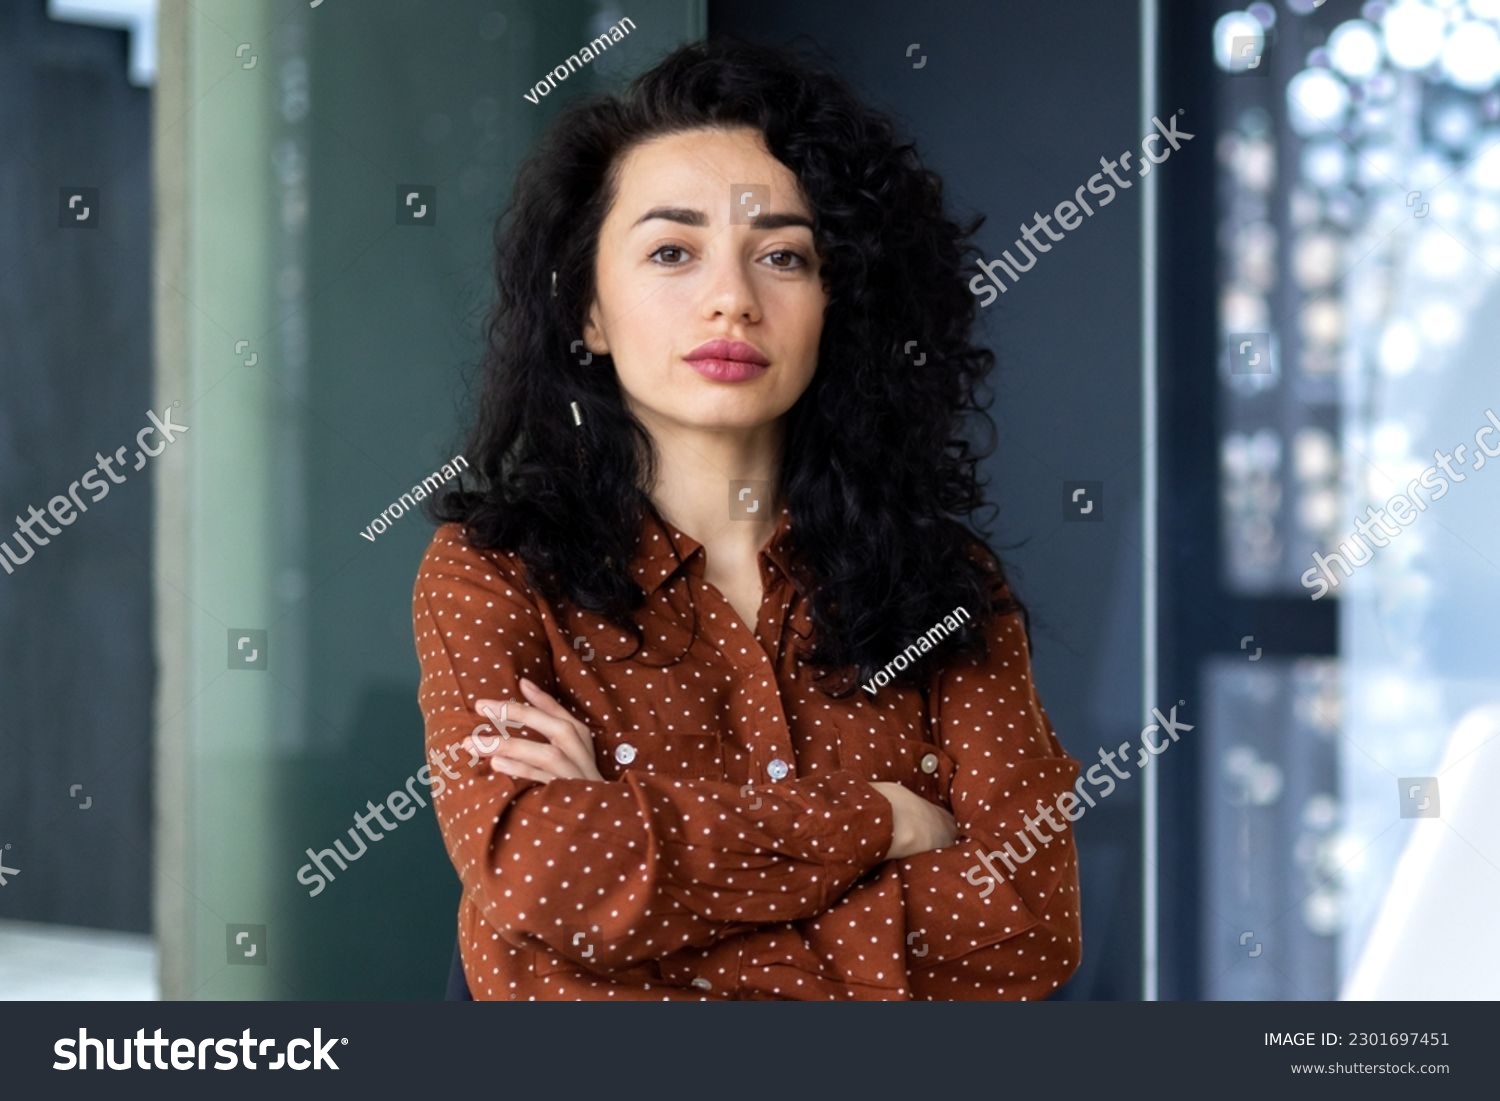 Portrait of mature female boss inside office building, successful hispanic woman looking serious at camera with crossed arms, businesswoman confident. #2301697451